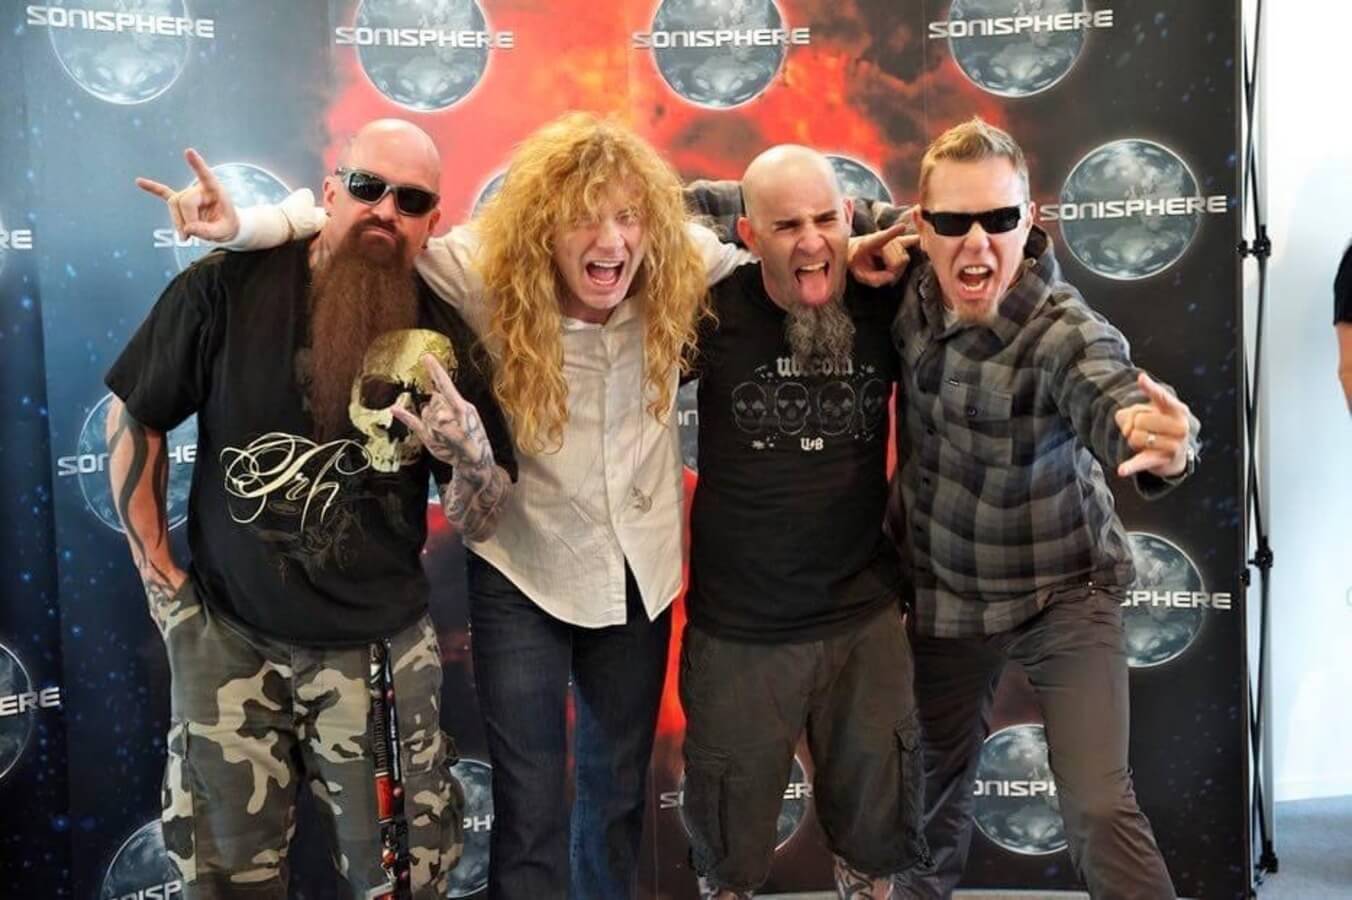 Dave Mustaine Shares Big Four Revival with Metallica, Slayer, and Anthrax